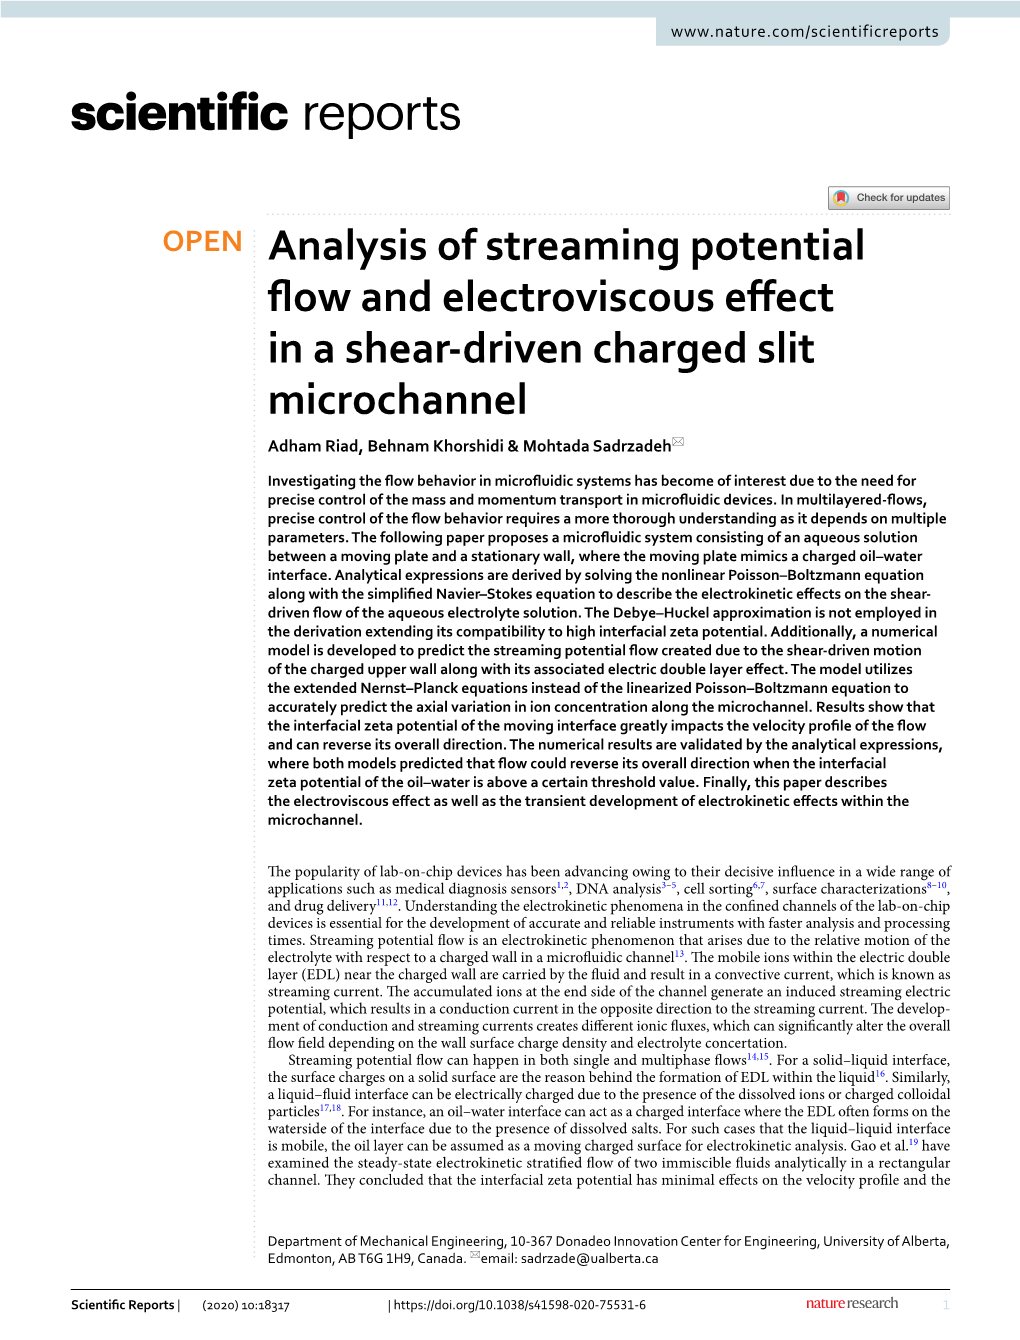 Analysis of Streaming Potential Flow and Electroviscous Effect in a Shear